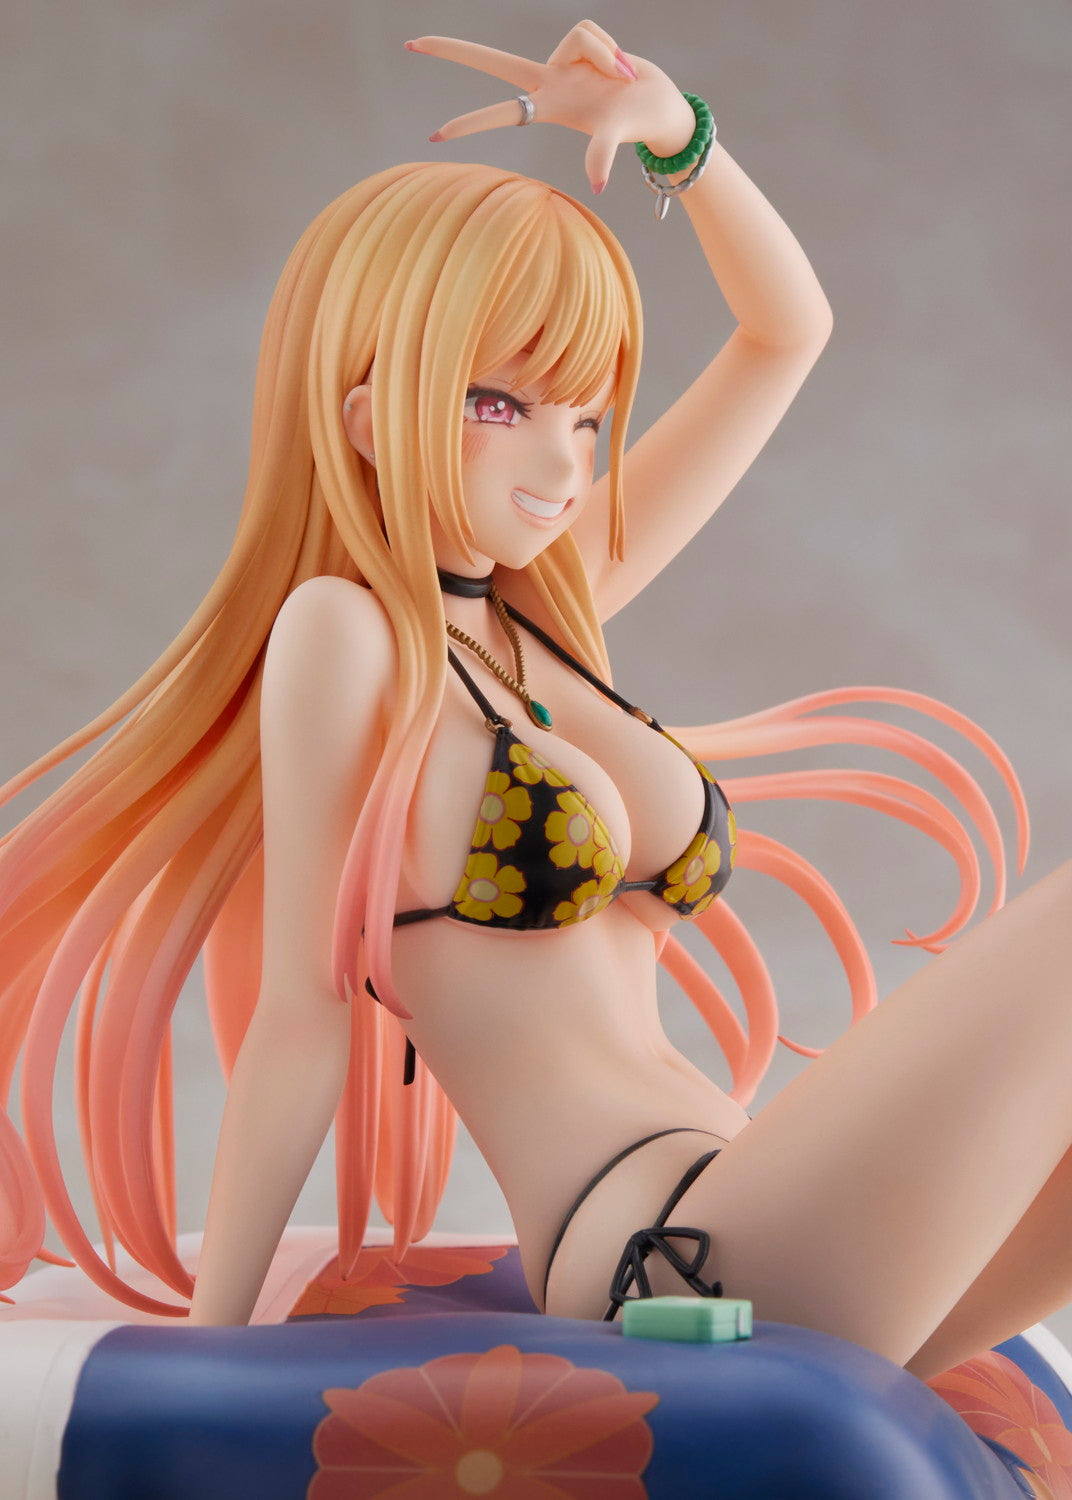 My Dress Up Darling - Marin Kitagawa 1/7 Scale Figure (Swimsuit Ver.) image count 8